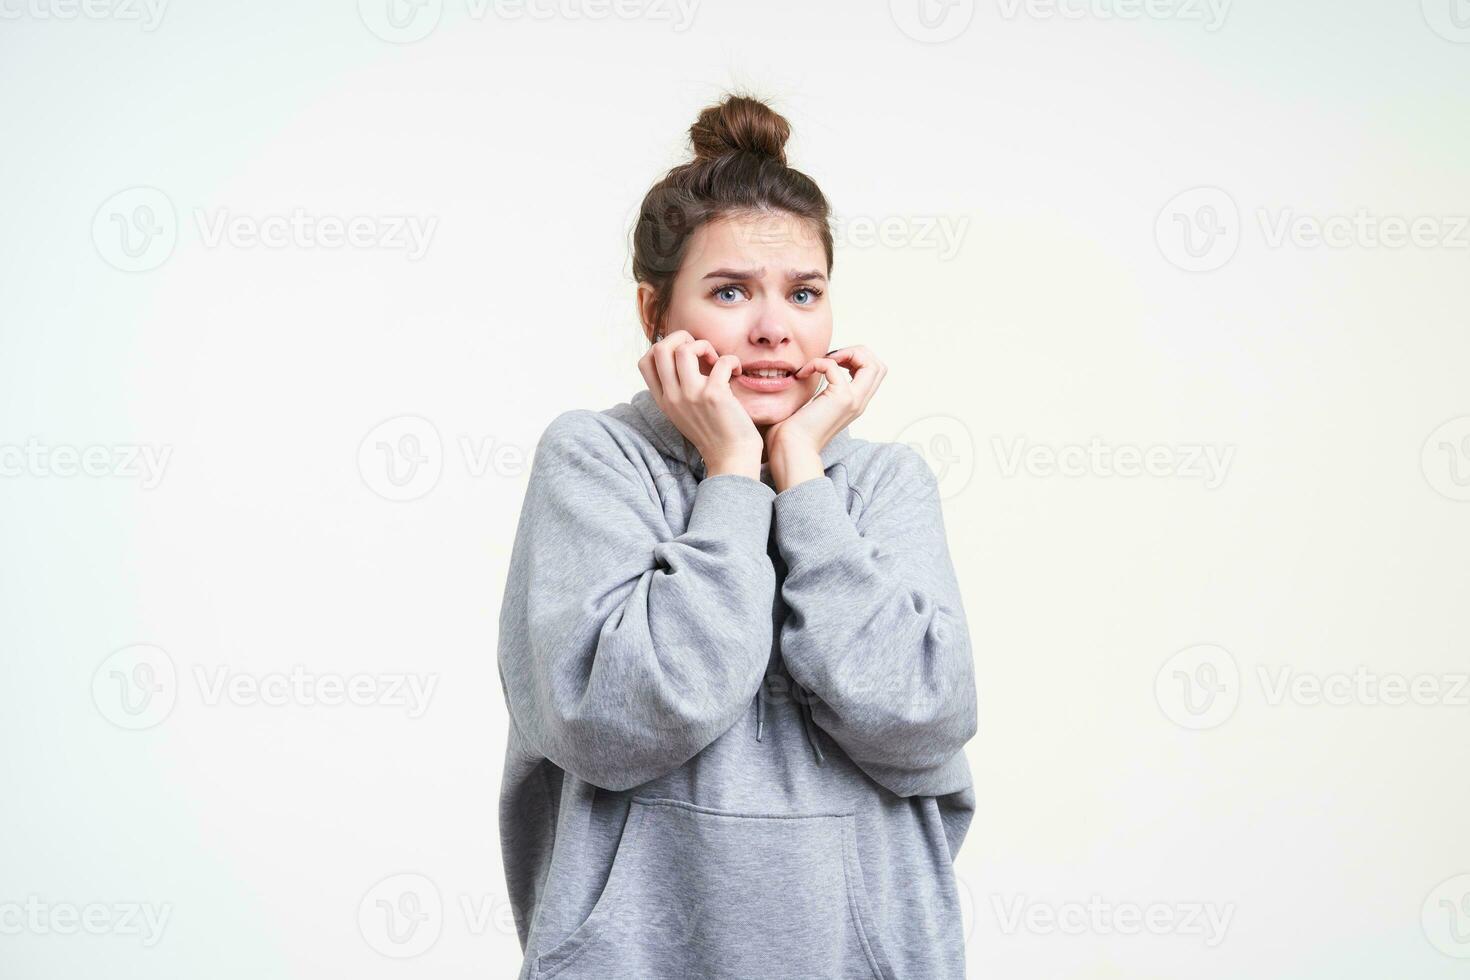 Frightened young blue-eyed brown haired woman holding her face with raised hands while looking scaredly to camera, isolated over white background in grey hoodie photo